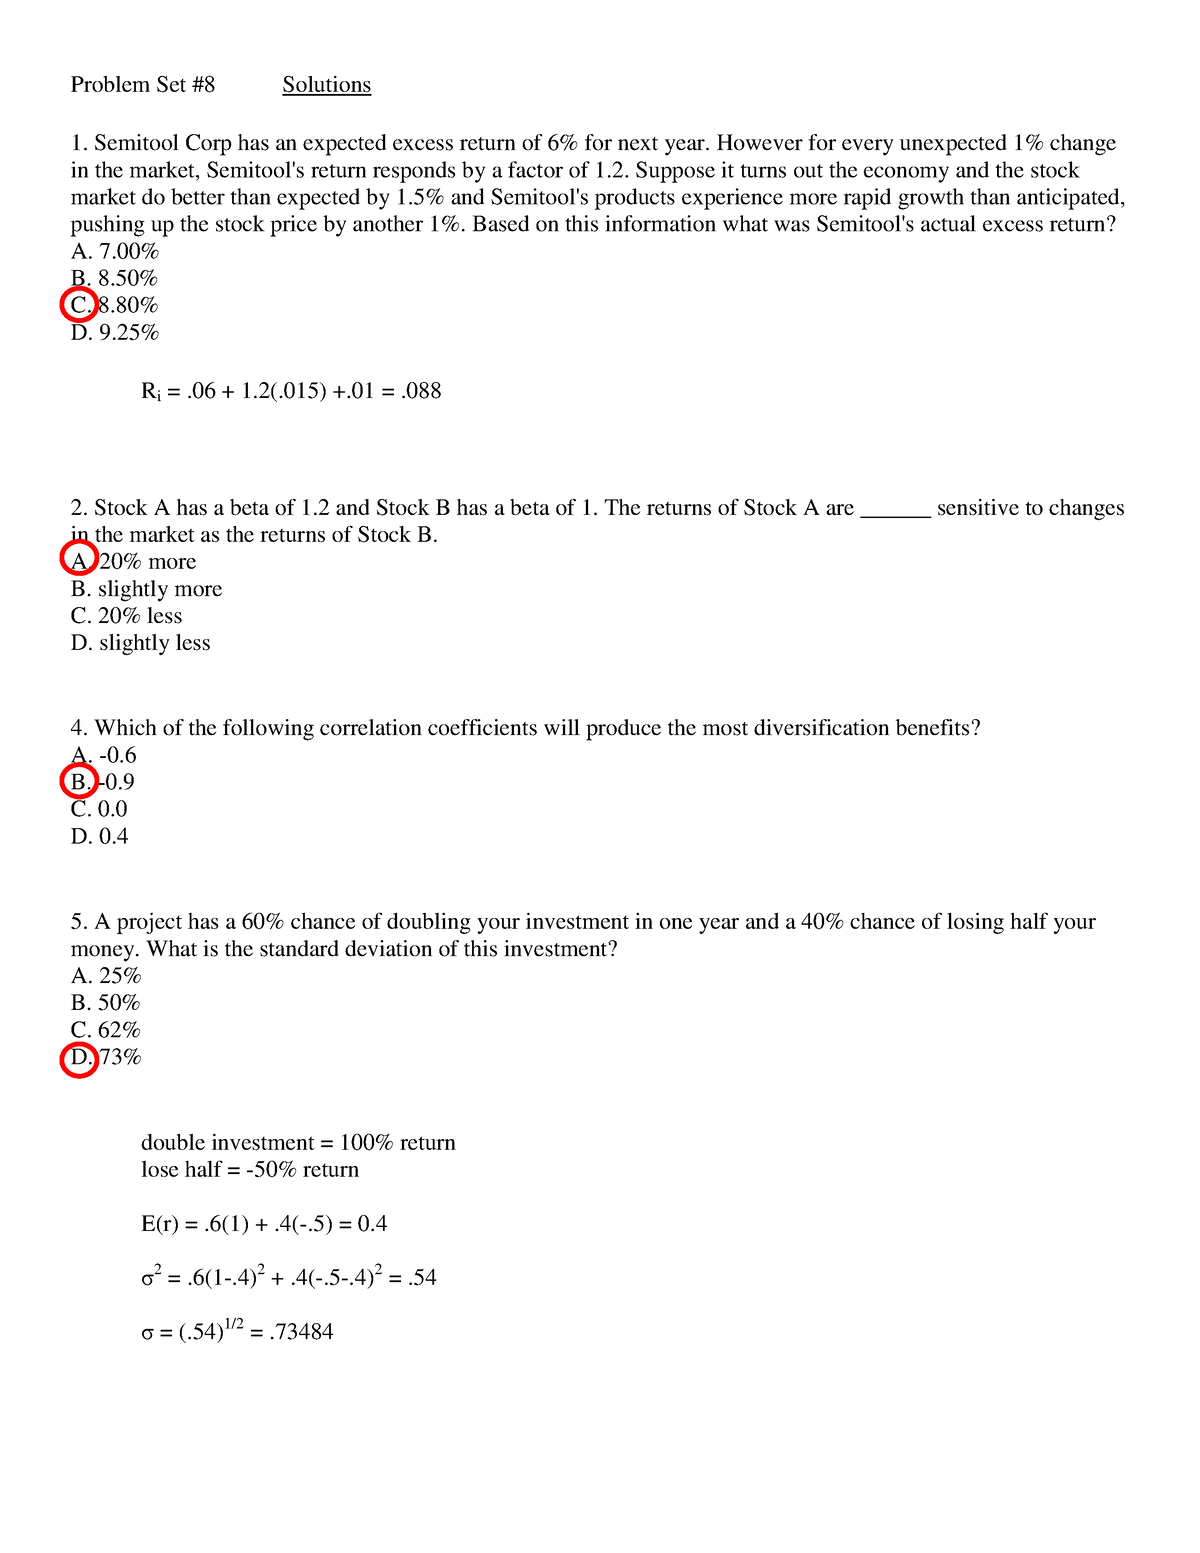 PS8 sol answer of PS8 Problem Set 8 Solutions Semitool Corp has an